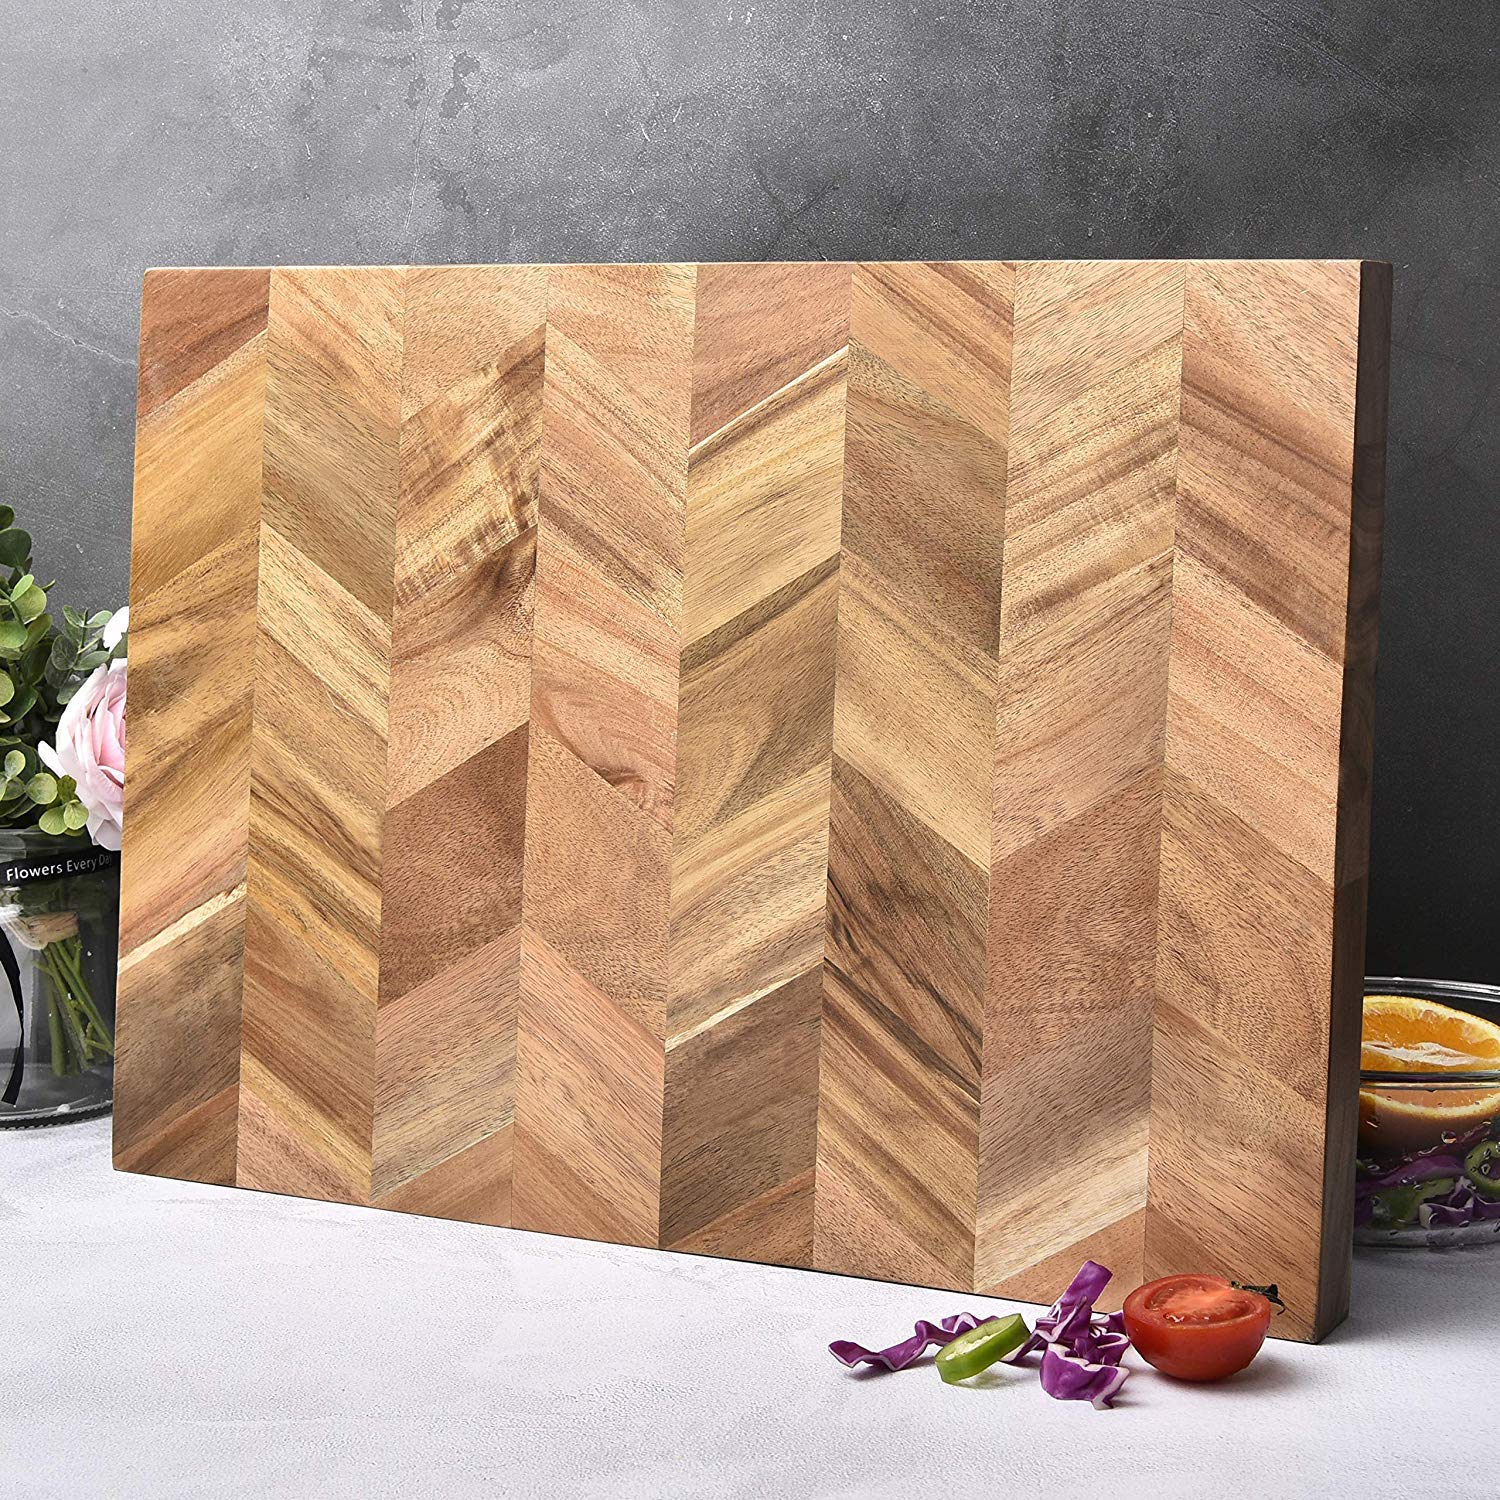 BILL.F Chopping Board 18" Large Acacia Wood Cutting Chopping Board for Kitchen with End-Grain,1" Thick Large Butcher Block 18x13x1.0 in